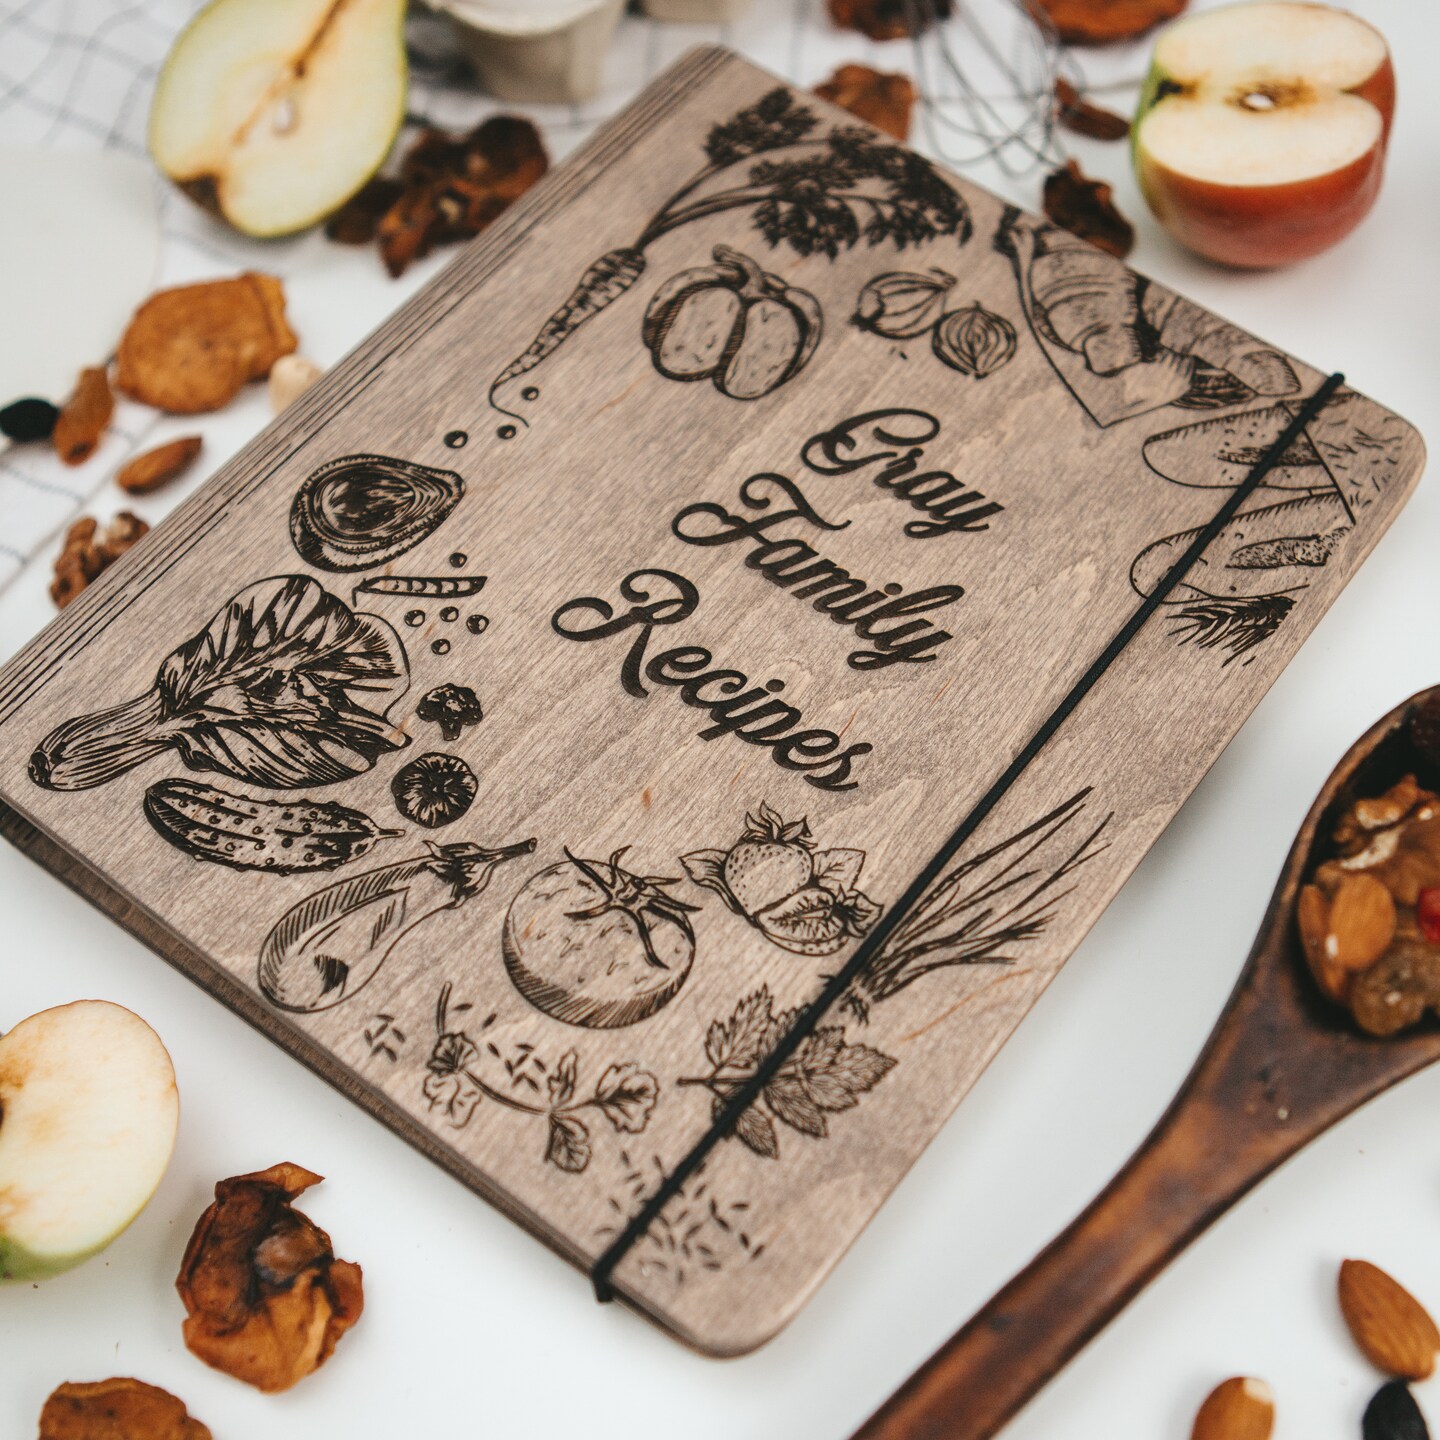 ENJOY THE WOOD Wooden Blank Recipe Book Binder - Personalized